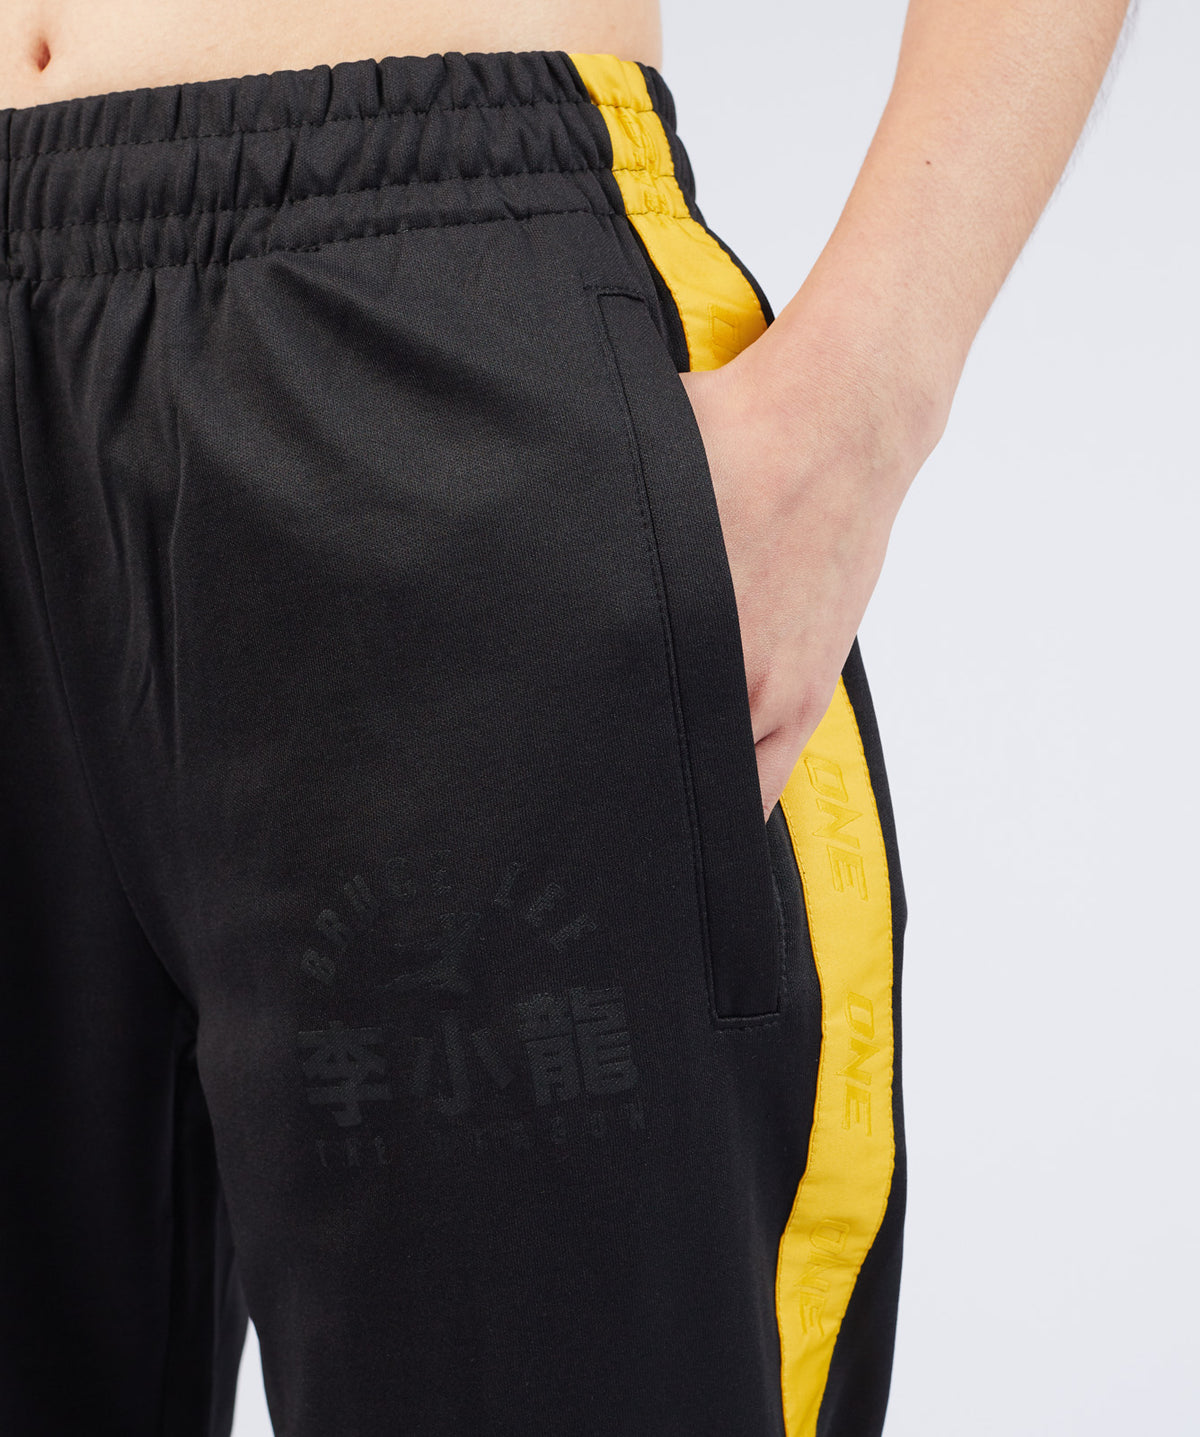 Mens Kill Bill and Game of Death Inspired Athletic Leggings: Perfect f –  Soldier Complex